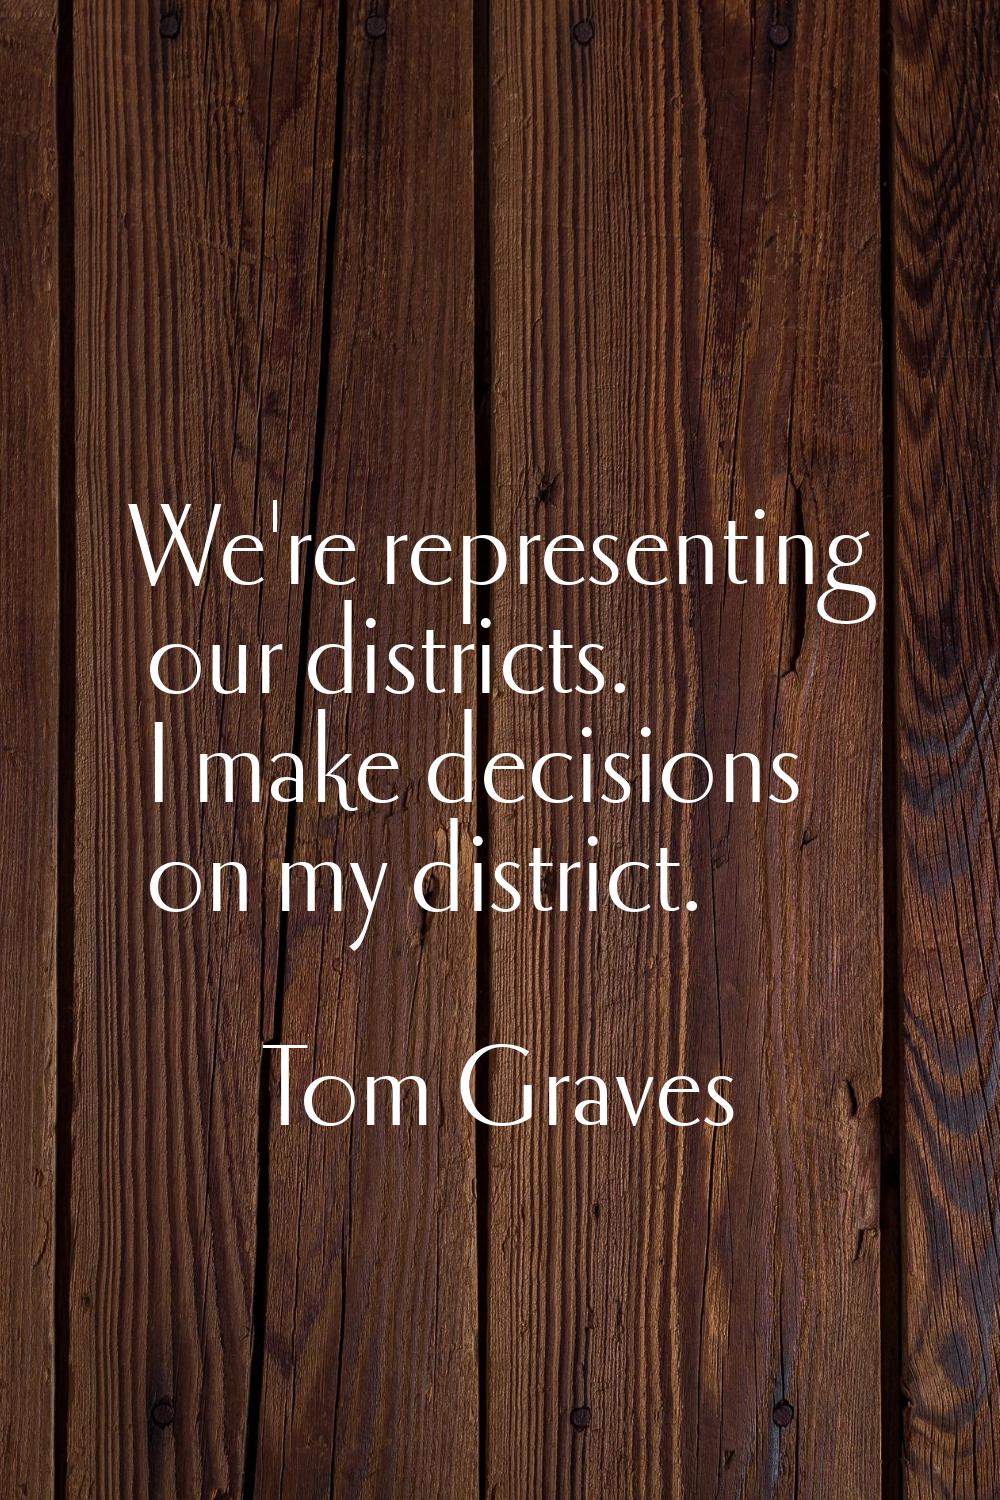 We're representing our districts. I make decisions on my district.